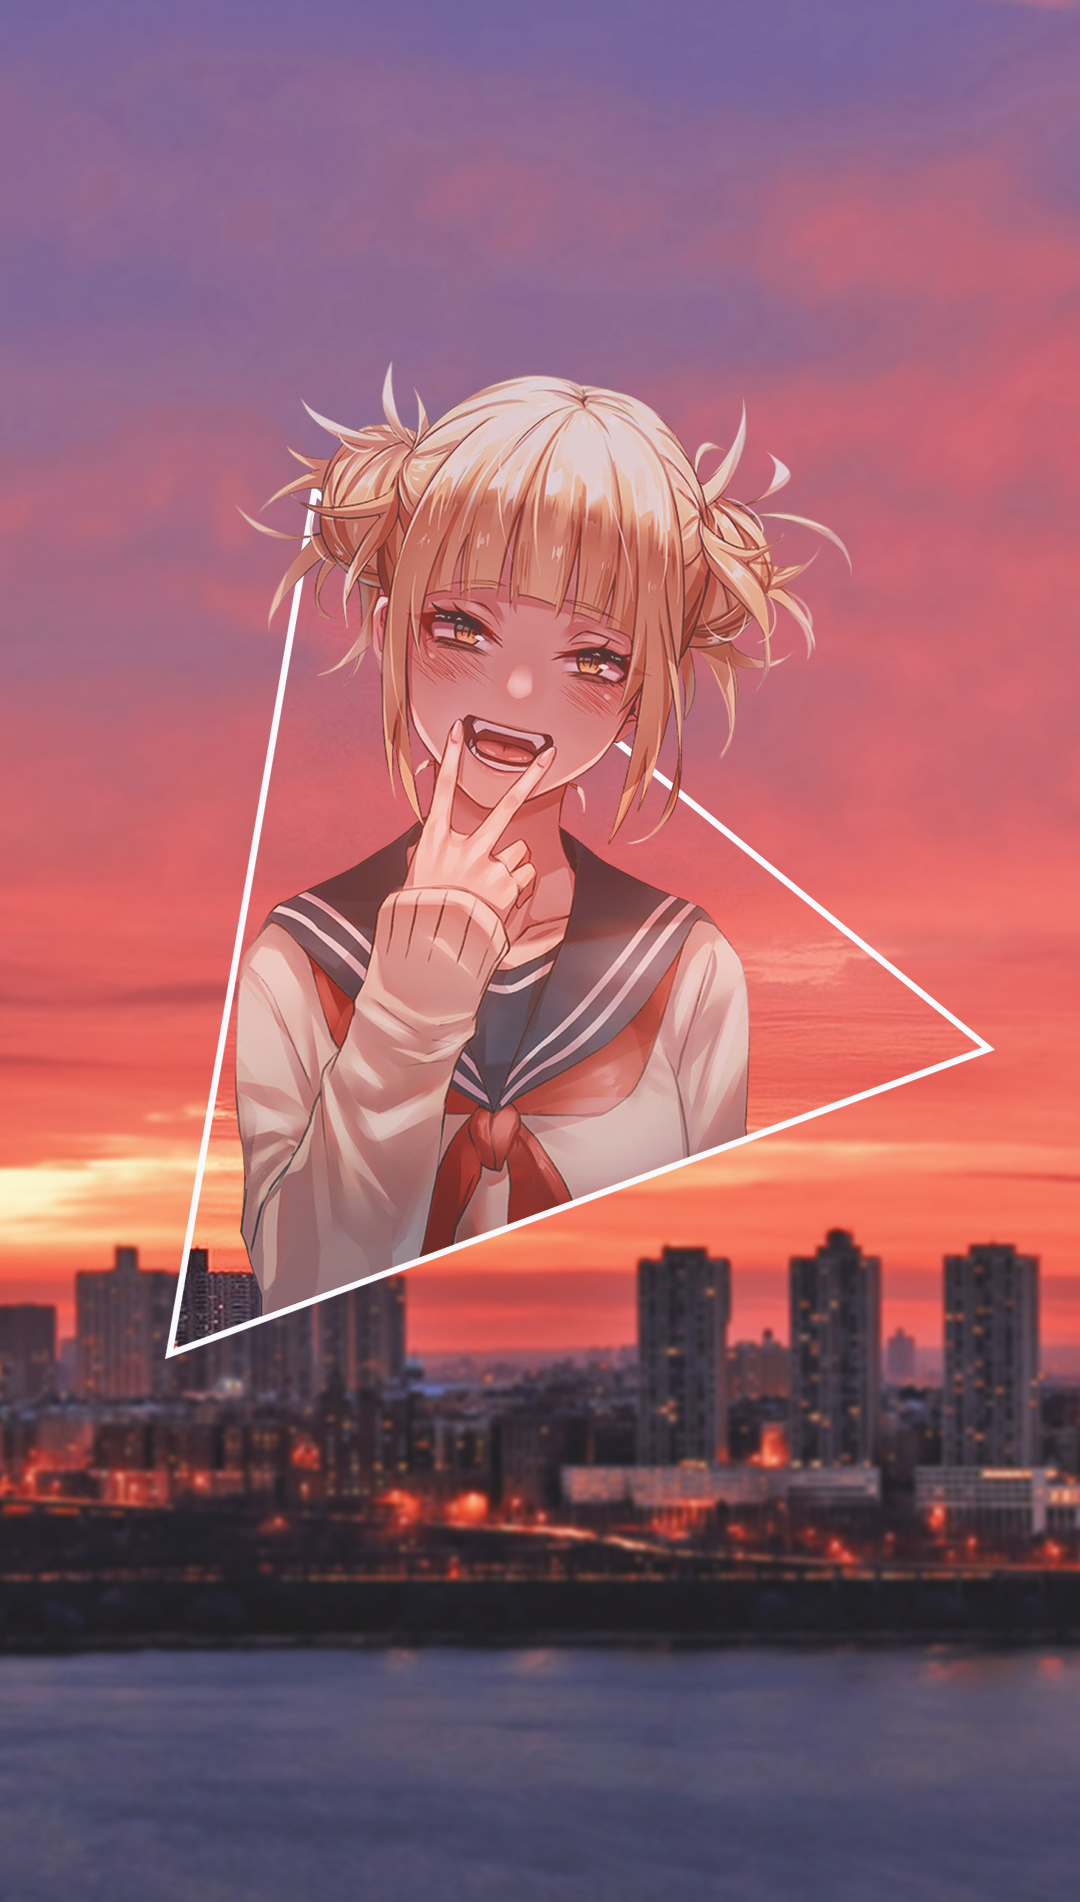 Anime 1080x1902 anime picture-in-picture anime girls Himiko Toga Boku no Hero Academia